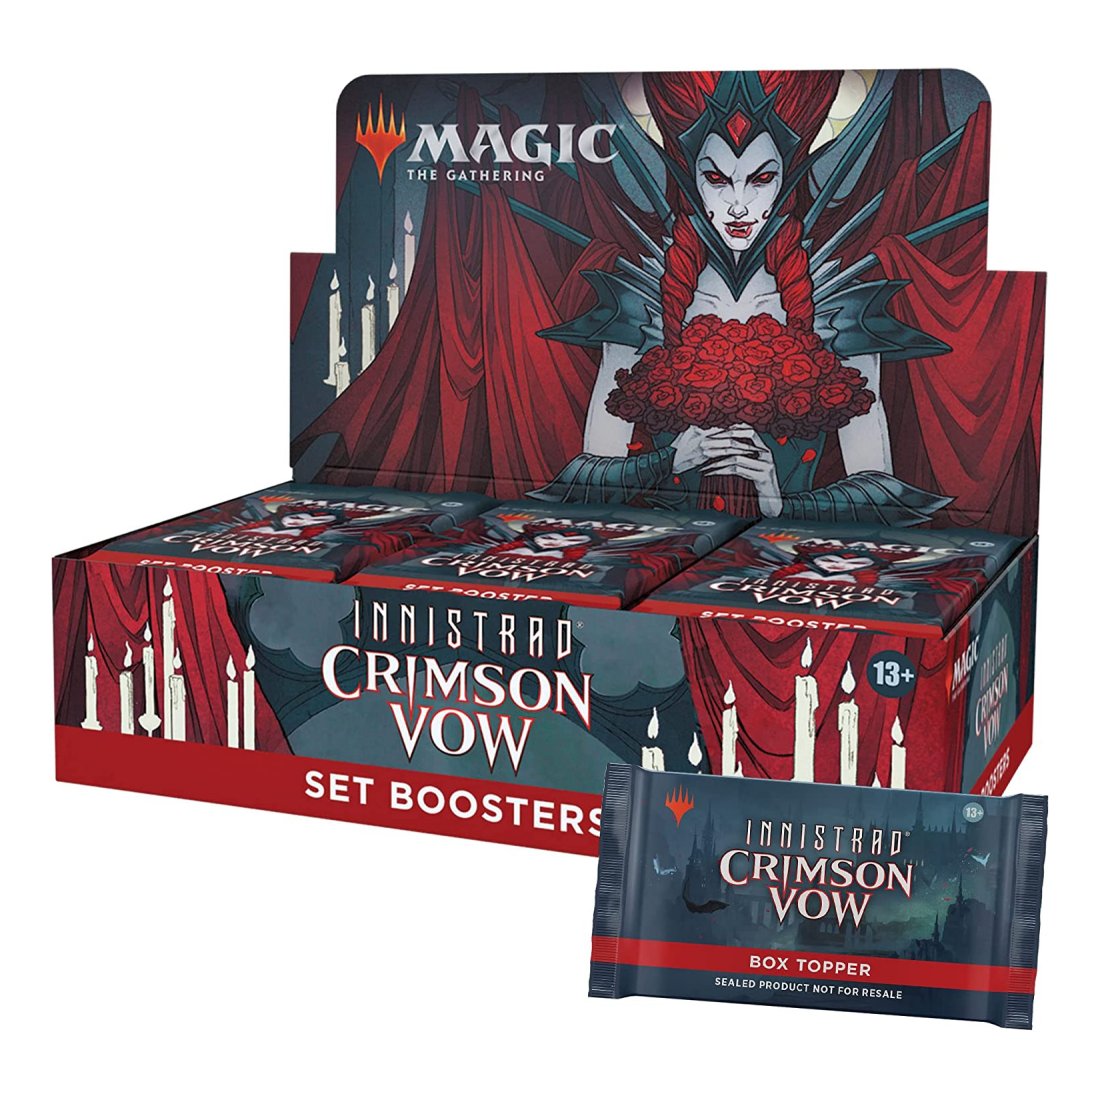 Magic The Gathering - Innistrad Crimson Vow -  Set Boosters